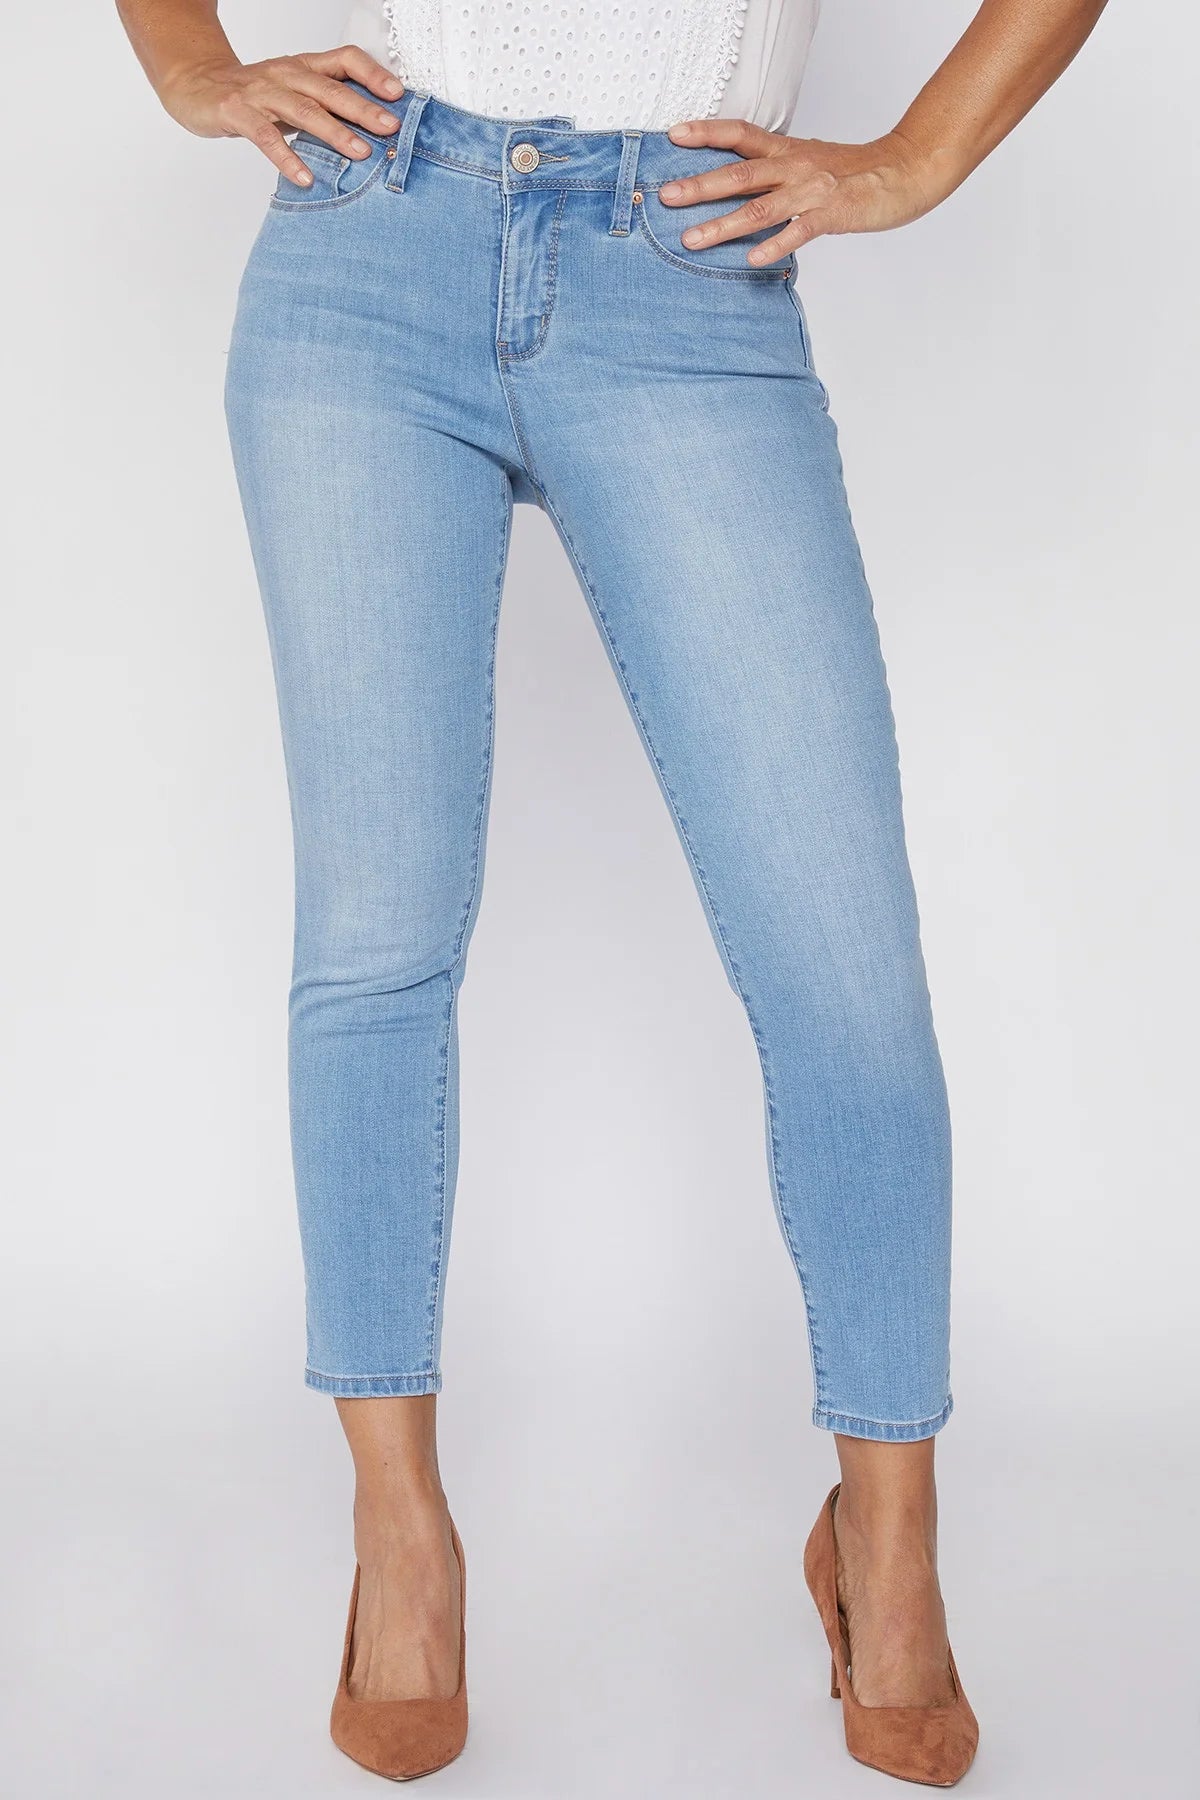 Petite Hide Your Muffin Top Jeans